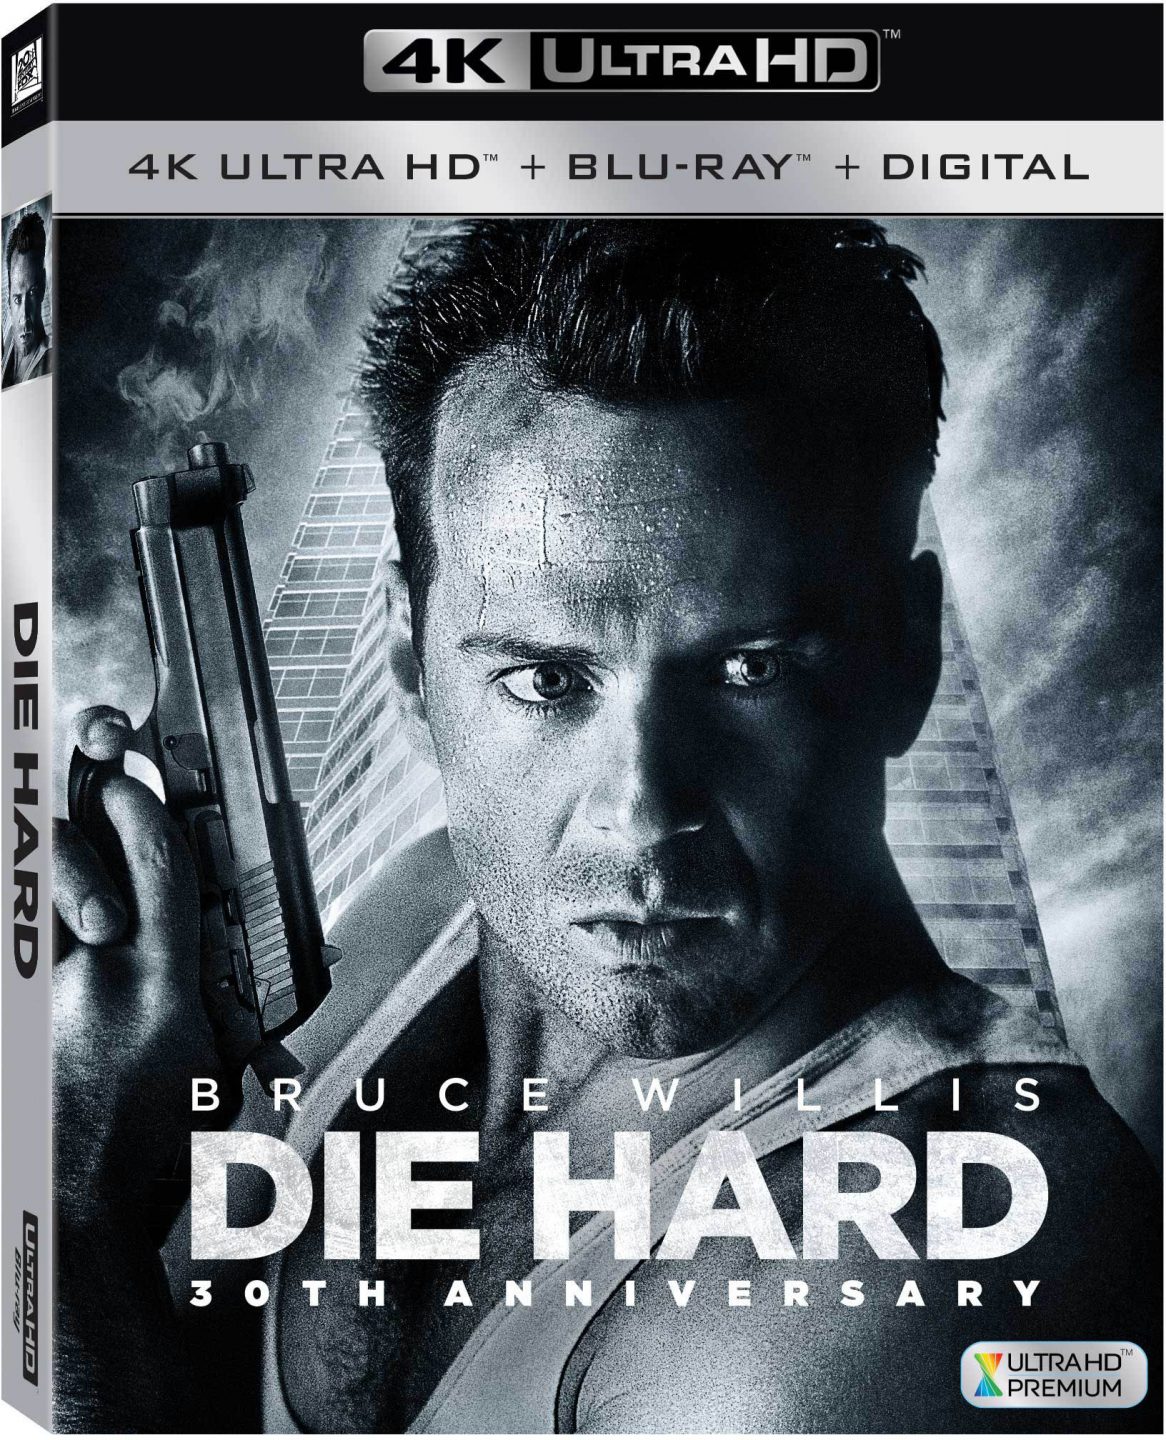 Die Hard 30th Anniversary 4K Ultra HD Combo cover (20th Century Fox Home Entertainment)